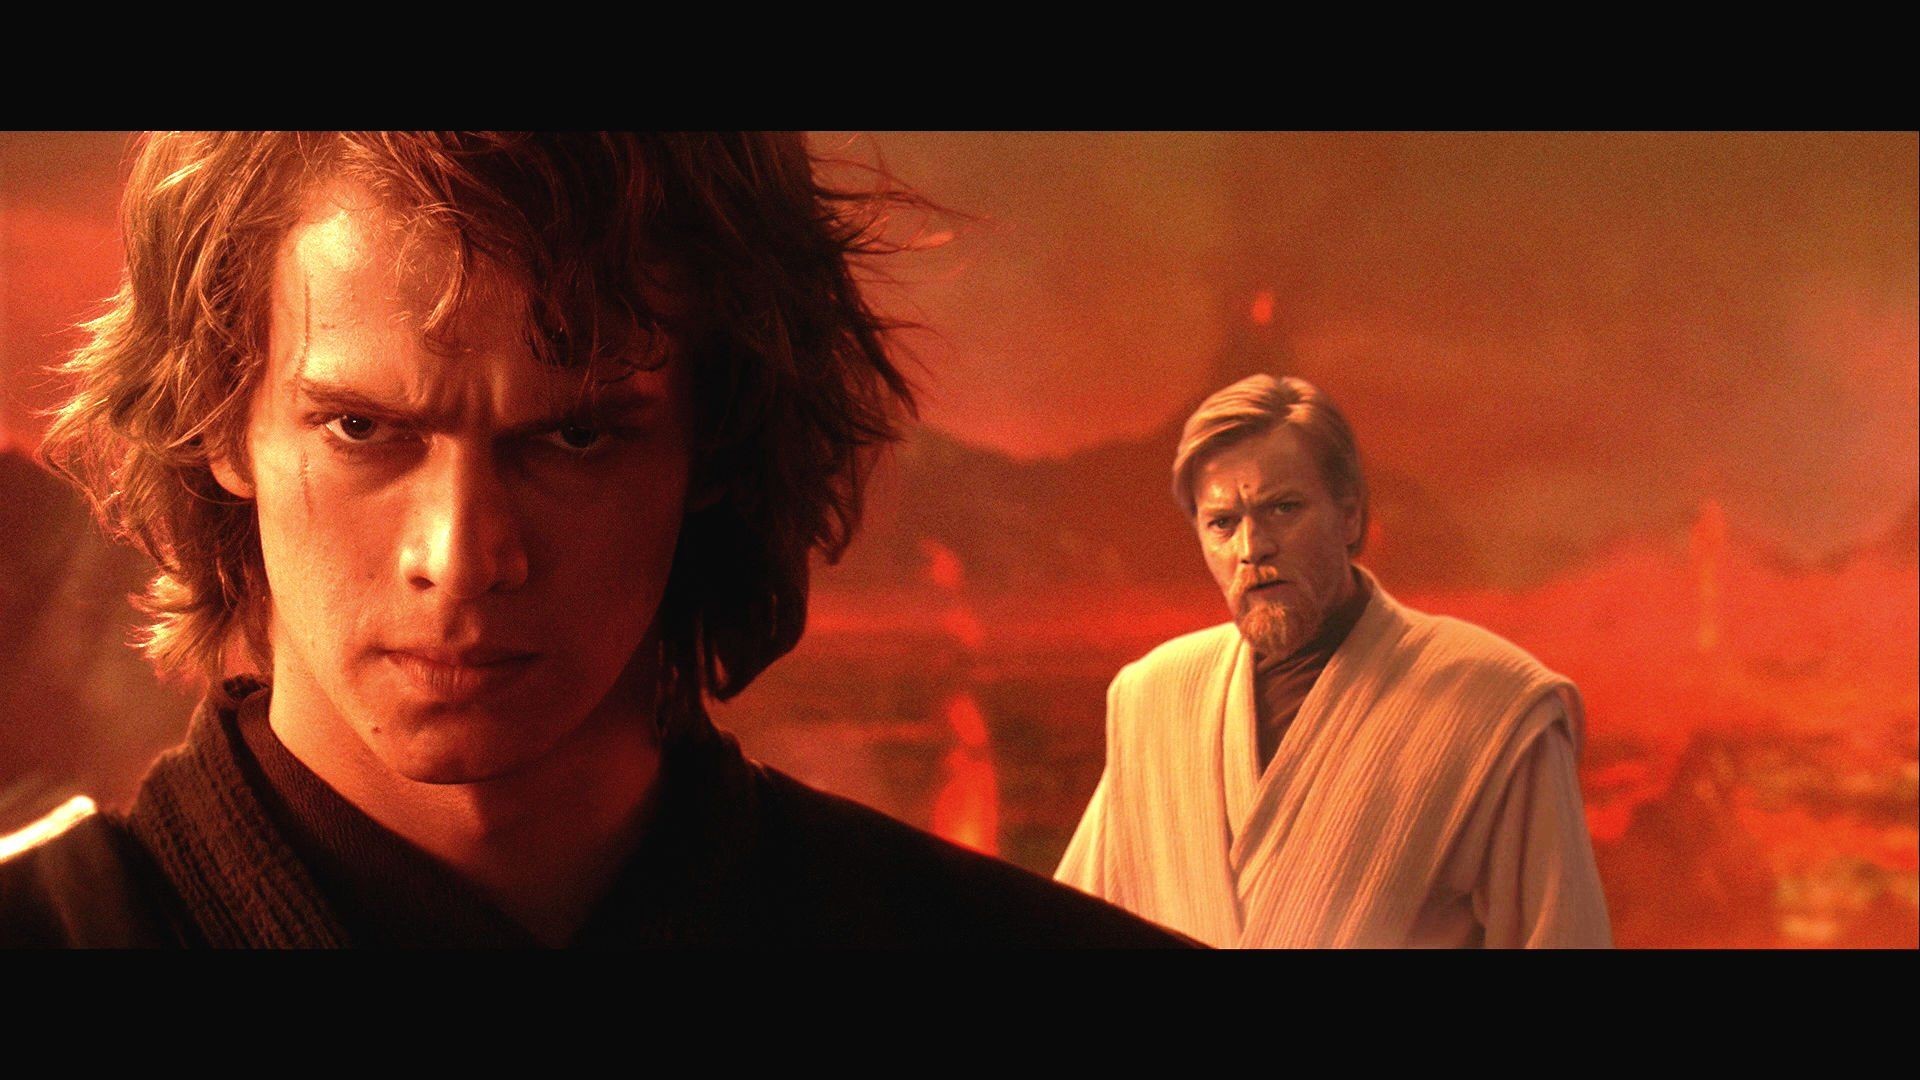 1920x1080 CGB Review of Star Wars Episode III: Revenge of the Sith (2005 .